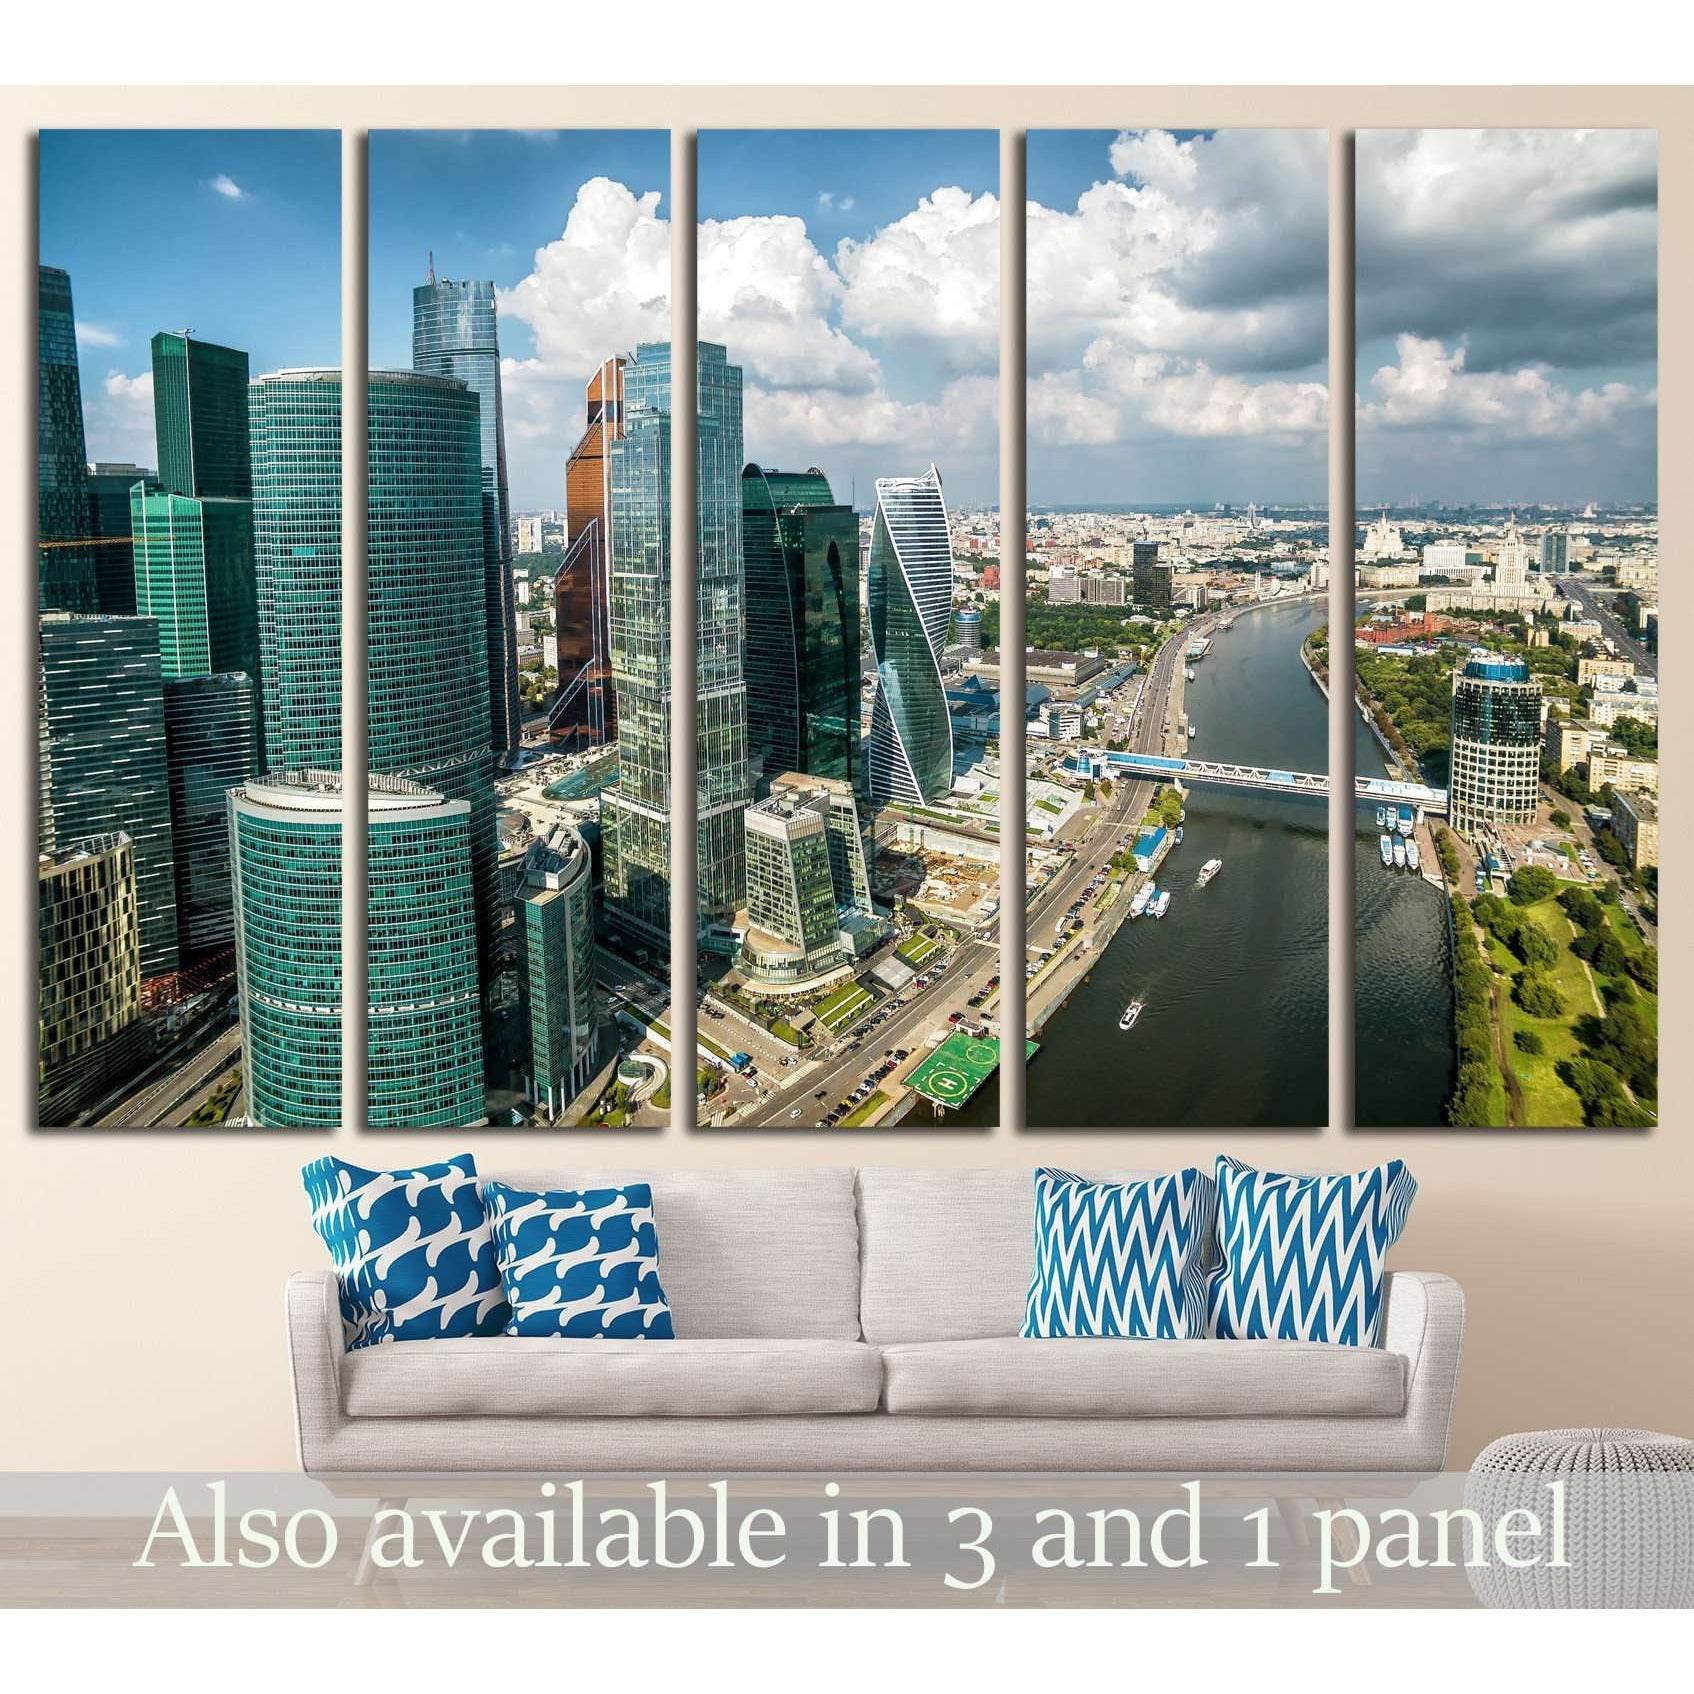 MOSCOW №1550 Ready to Hang Canvas Print